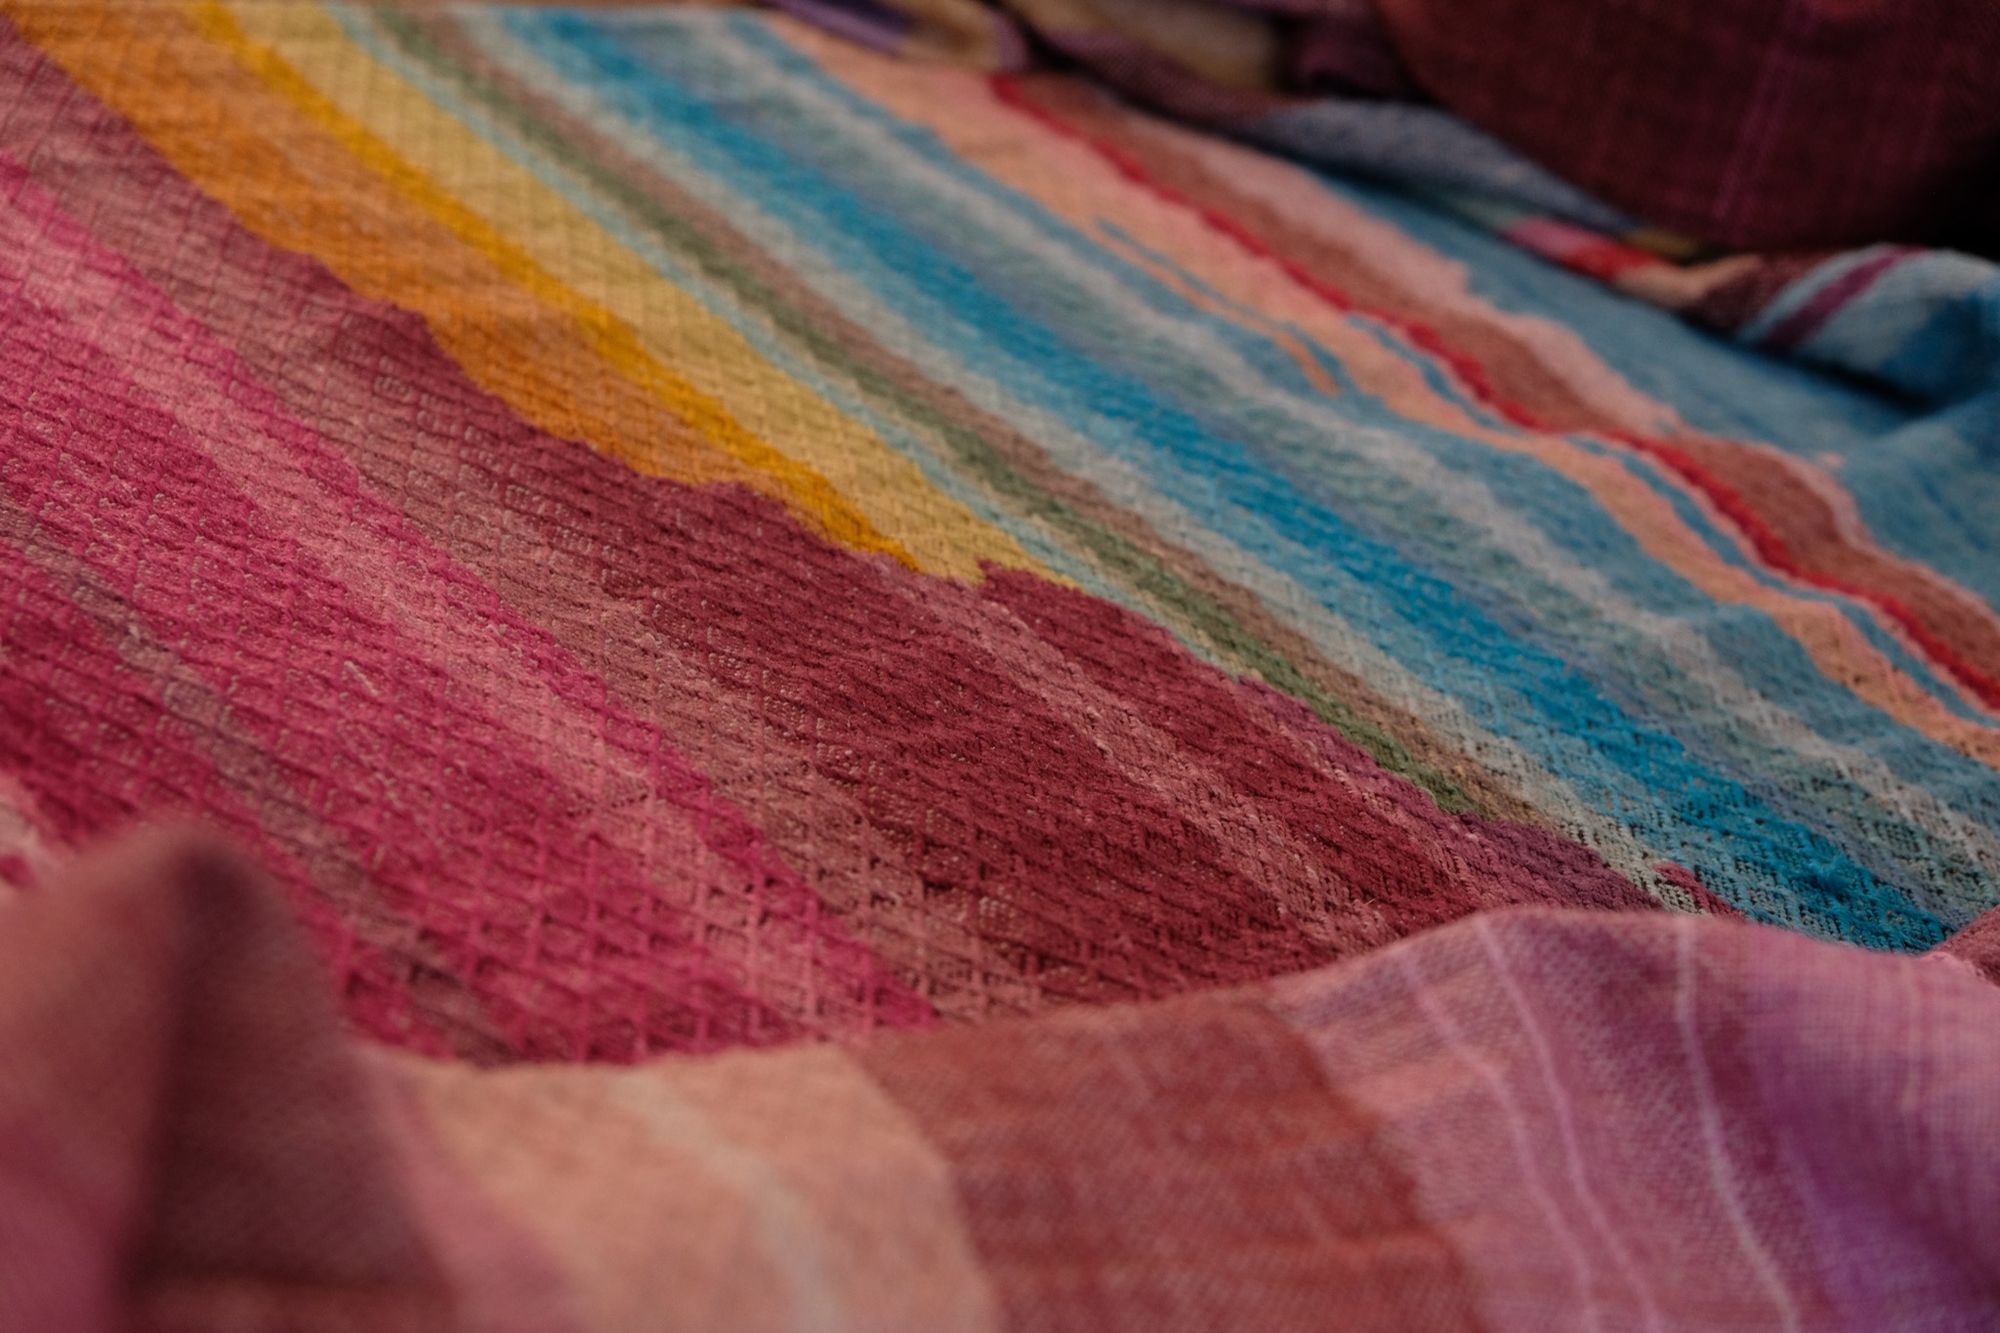 Brightly colored fabric in pink, yellow, orange, blue, cream, green and purple is laid out on a wooden floor